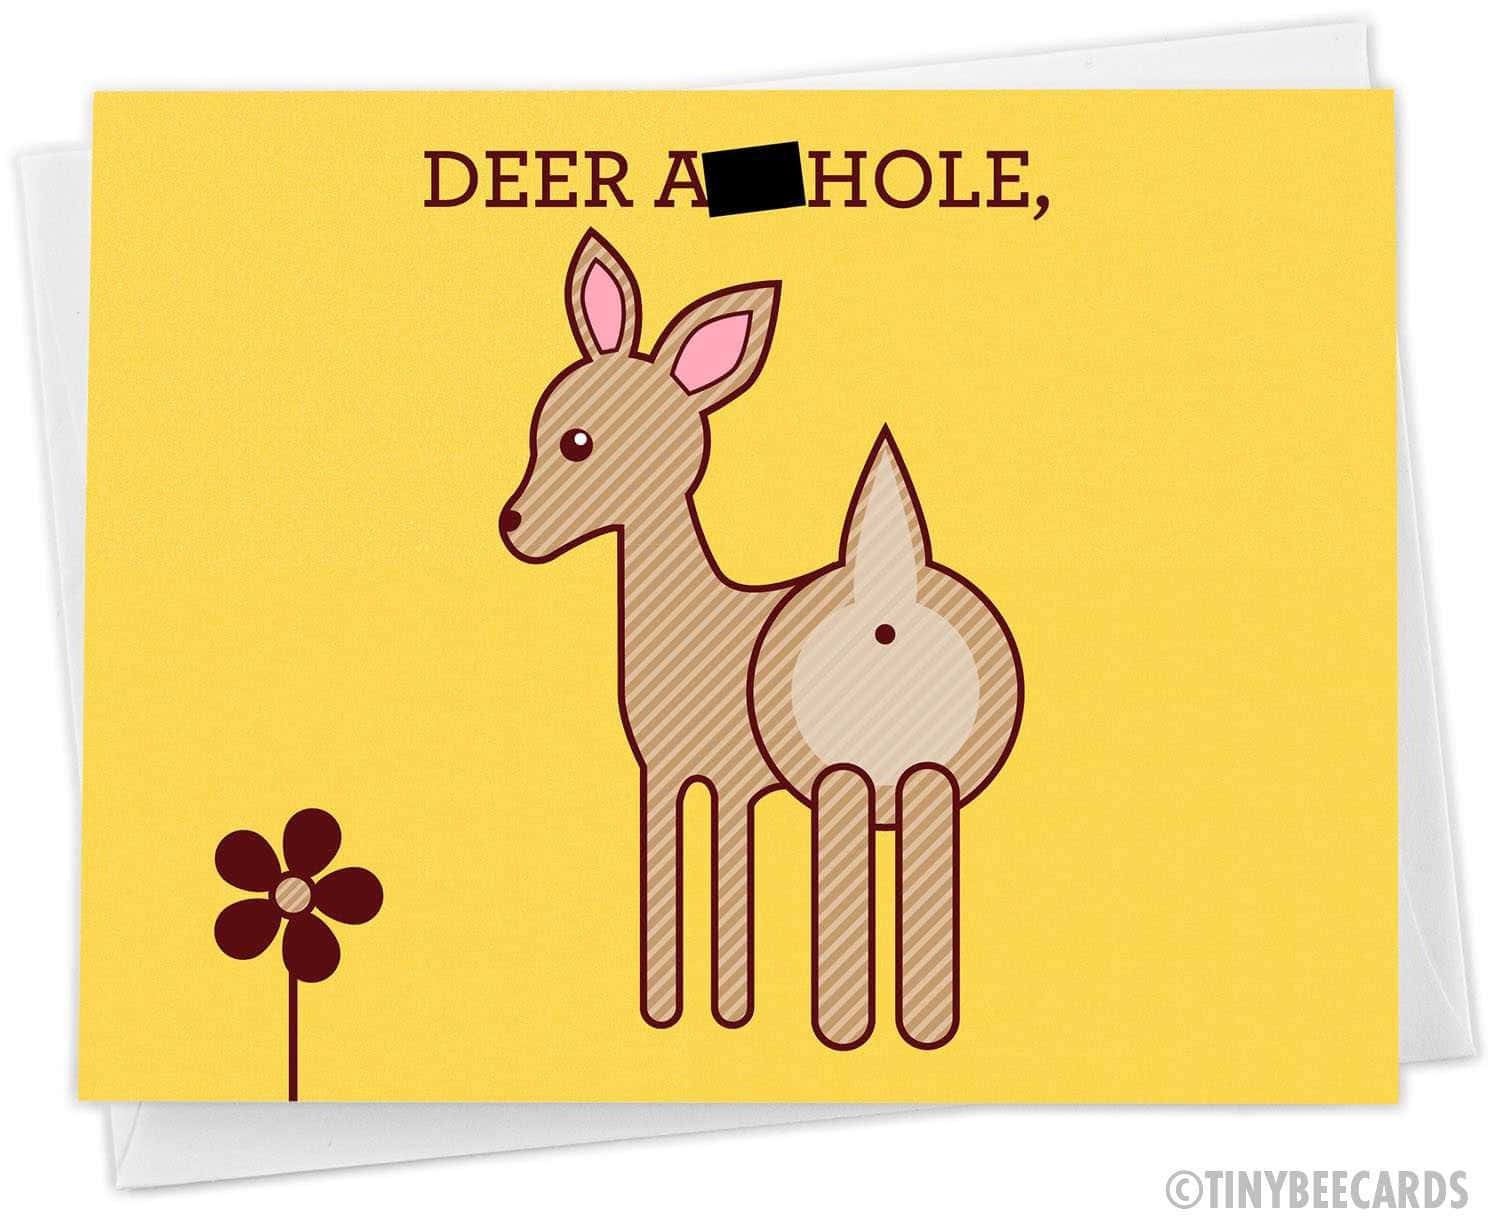 This Little Deer Certainly Has A Sense Of Humor